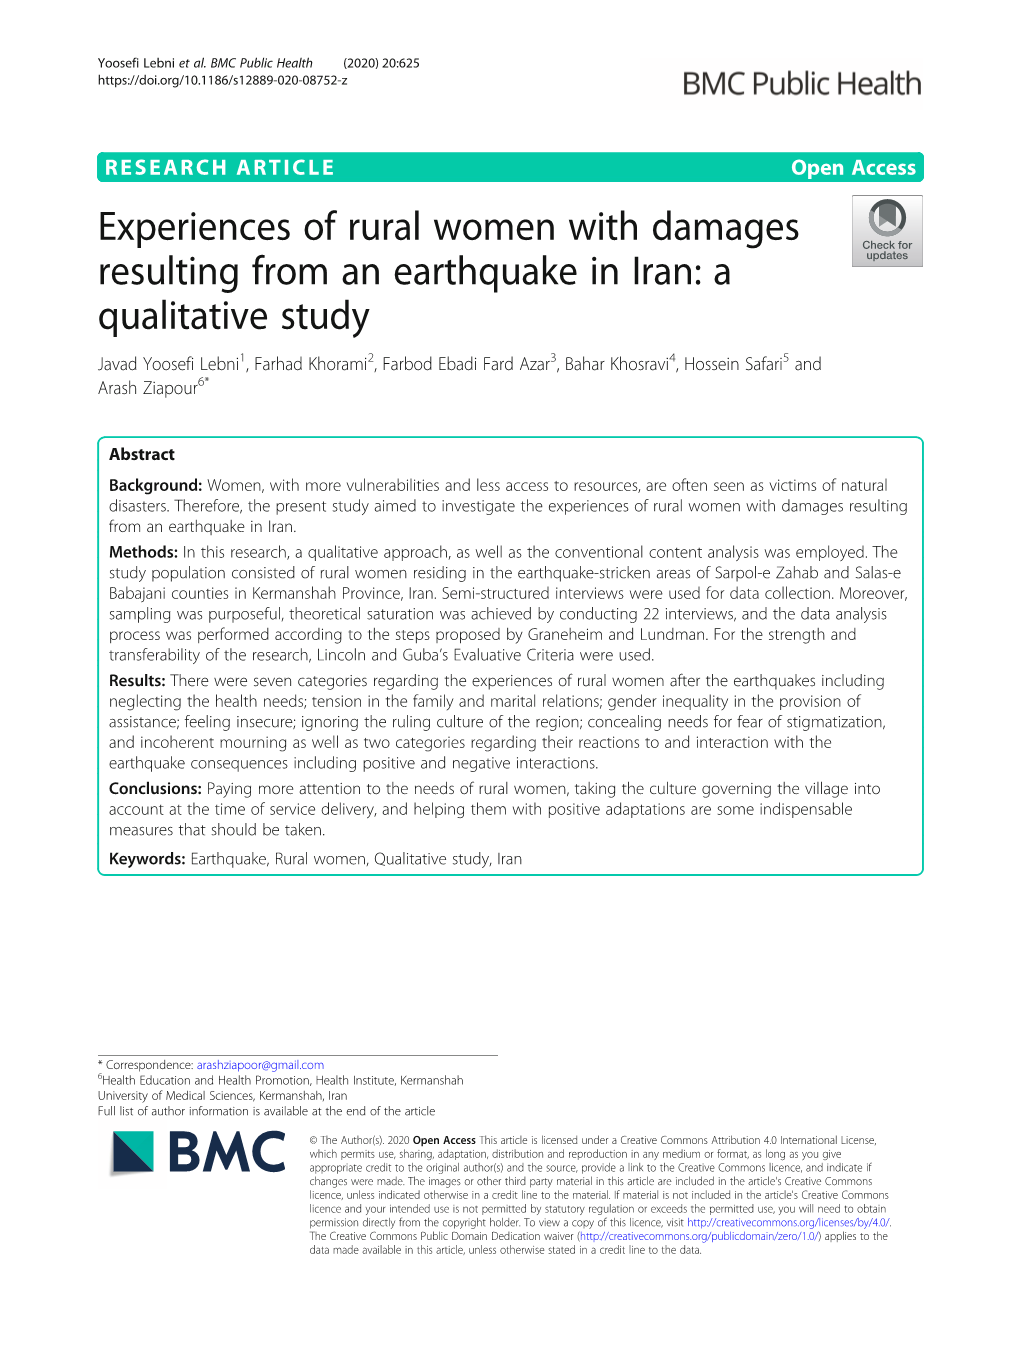 Experiences of Rural Women with Damages